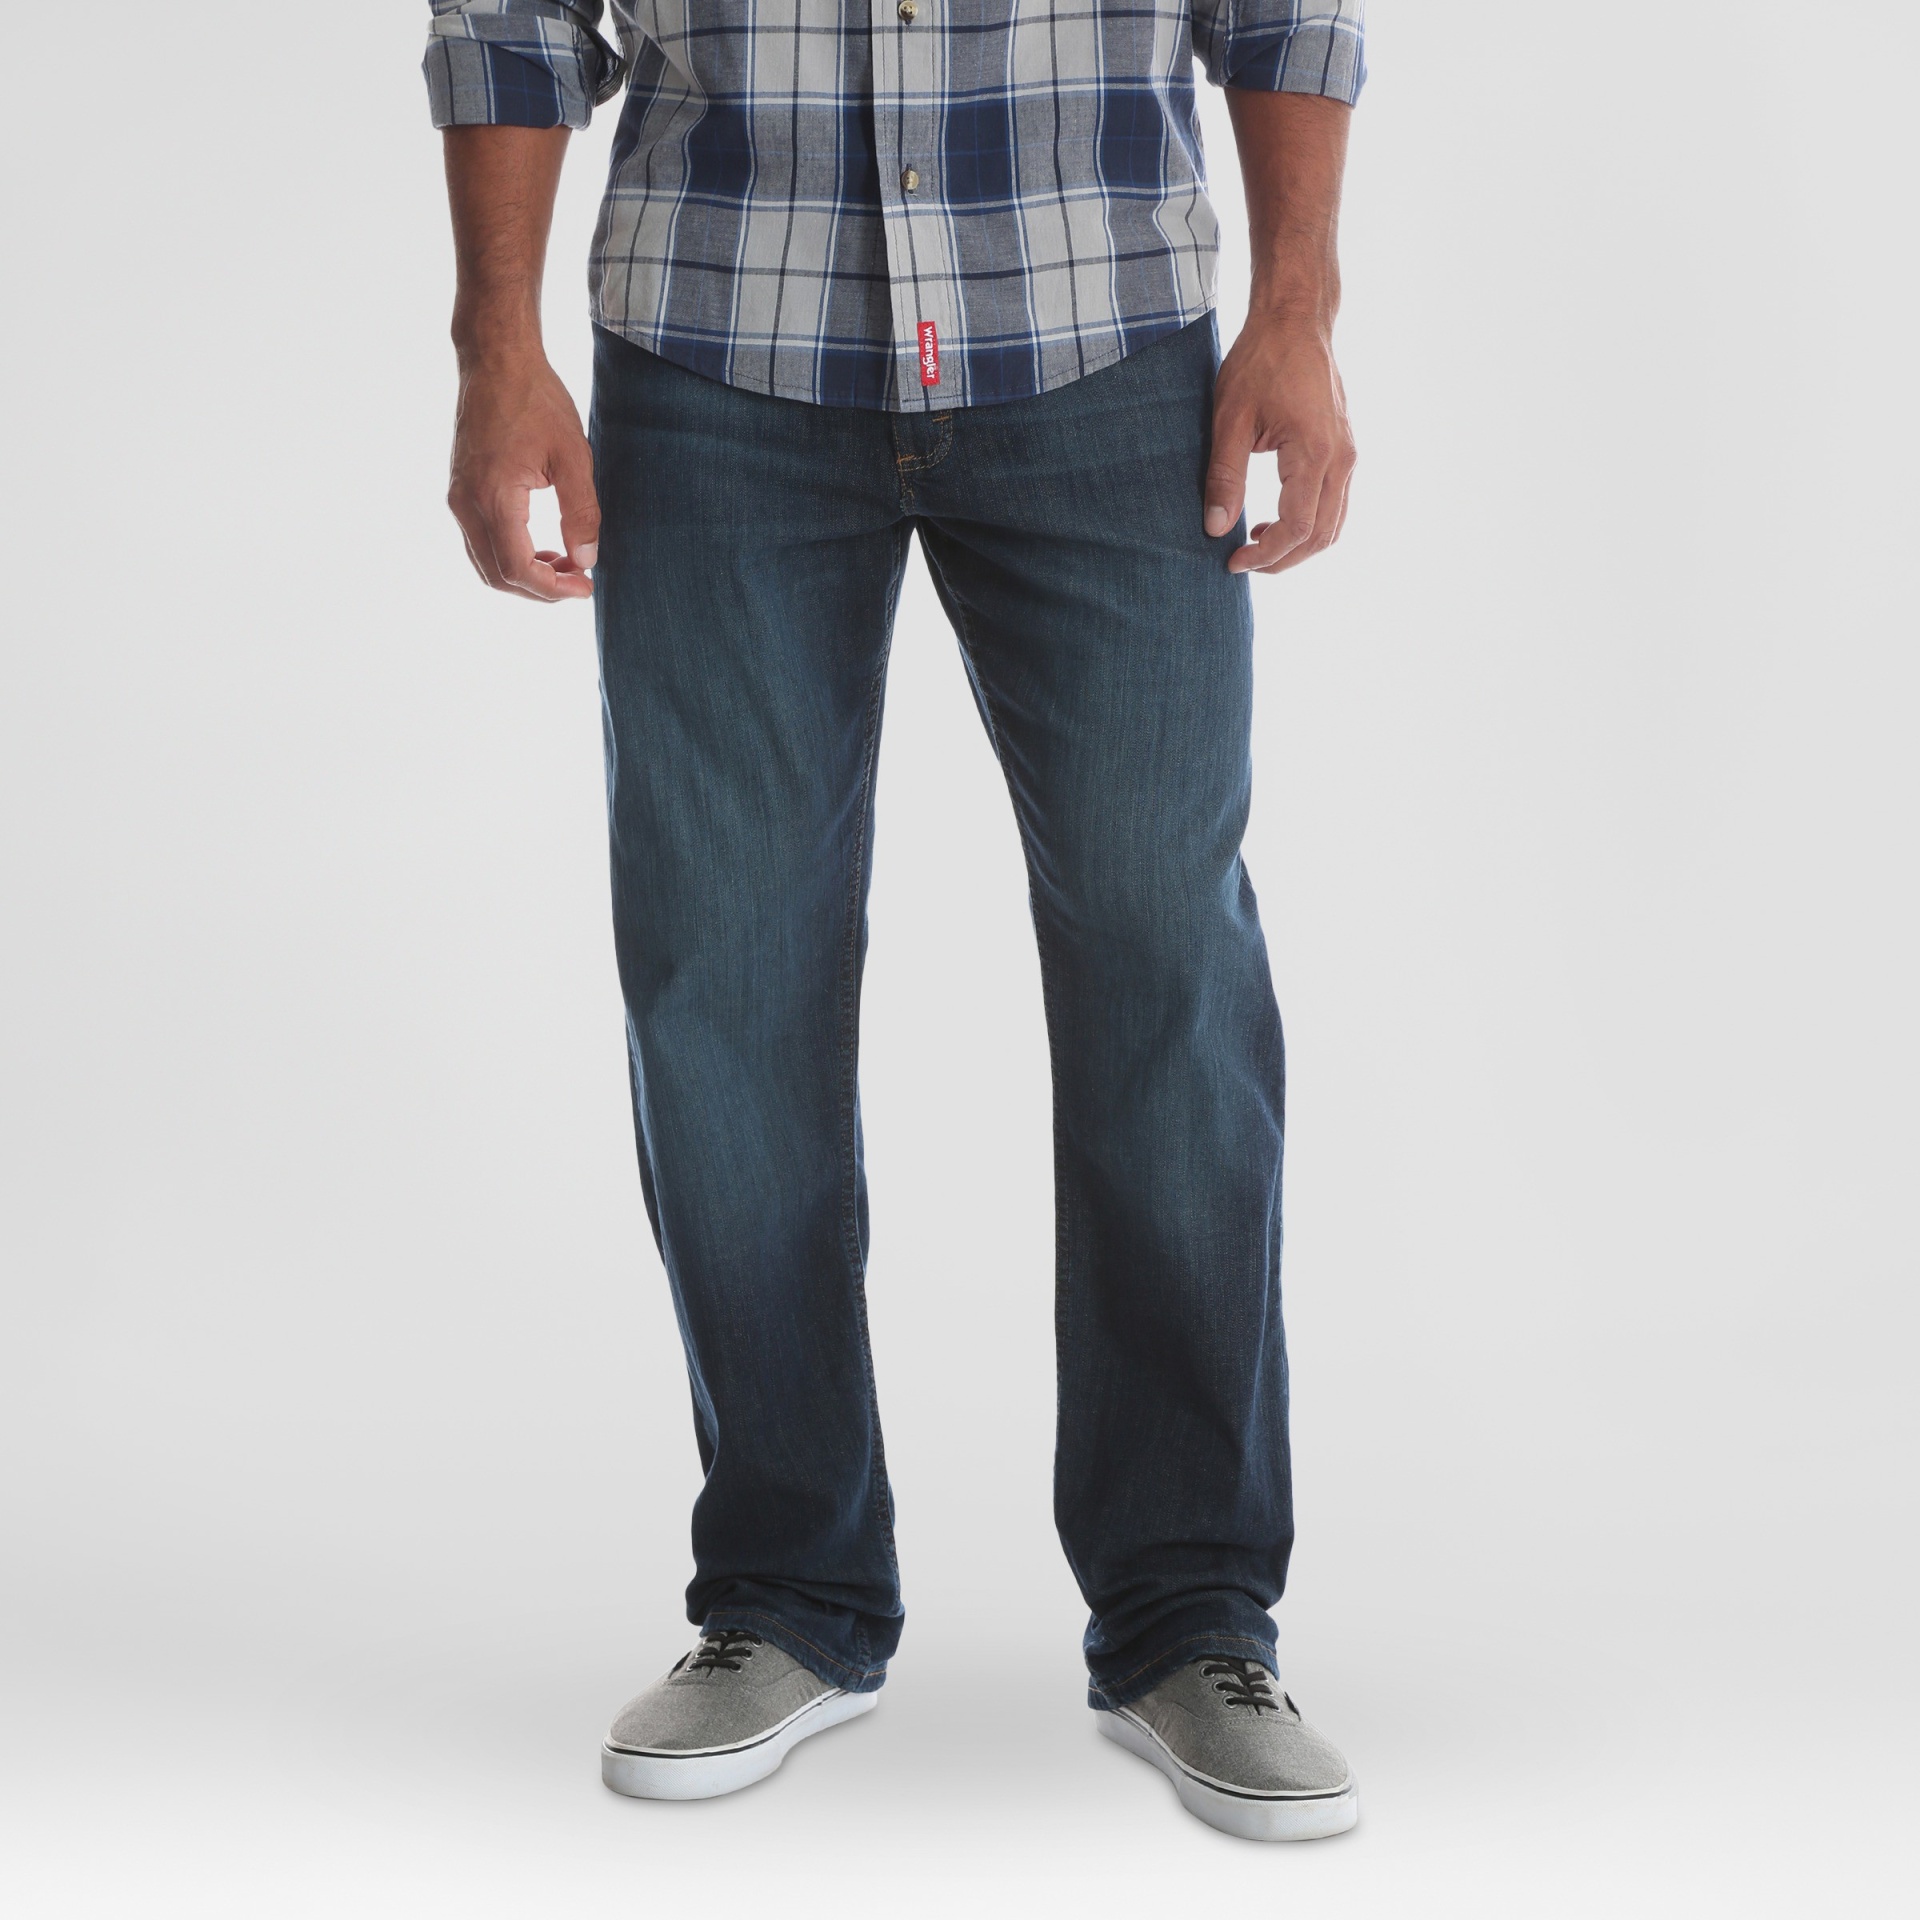 Wrangler Men's and Big Men's Relaxed Fit Jeans with Flex